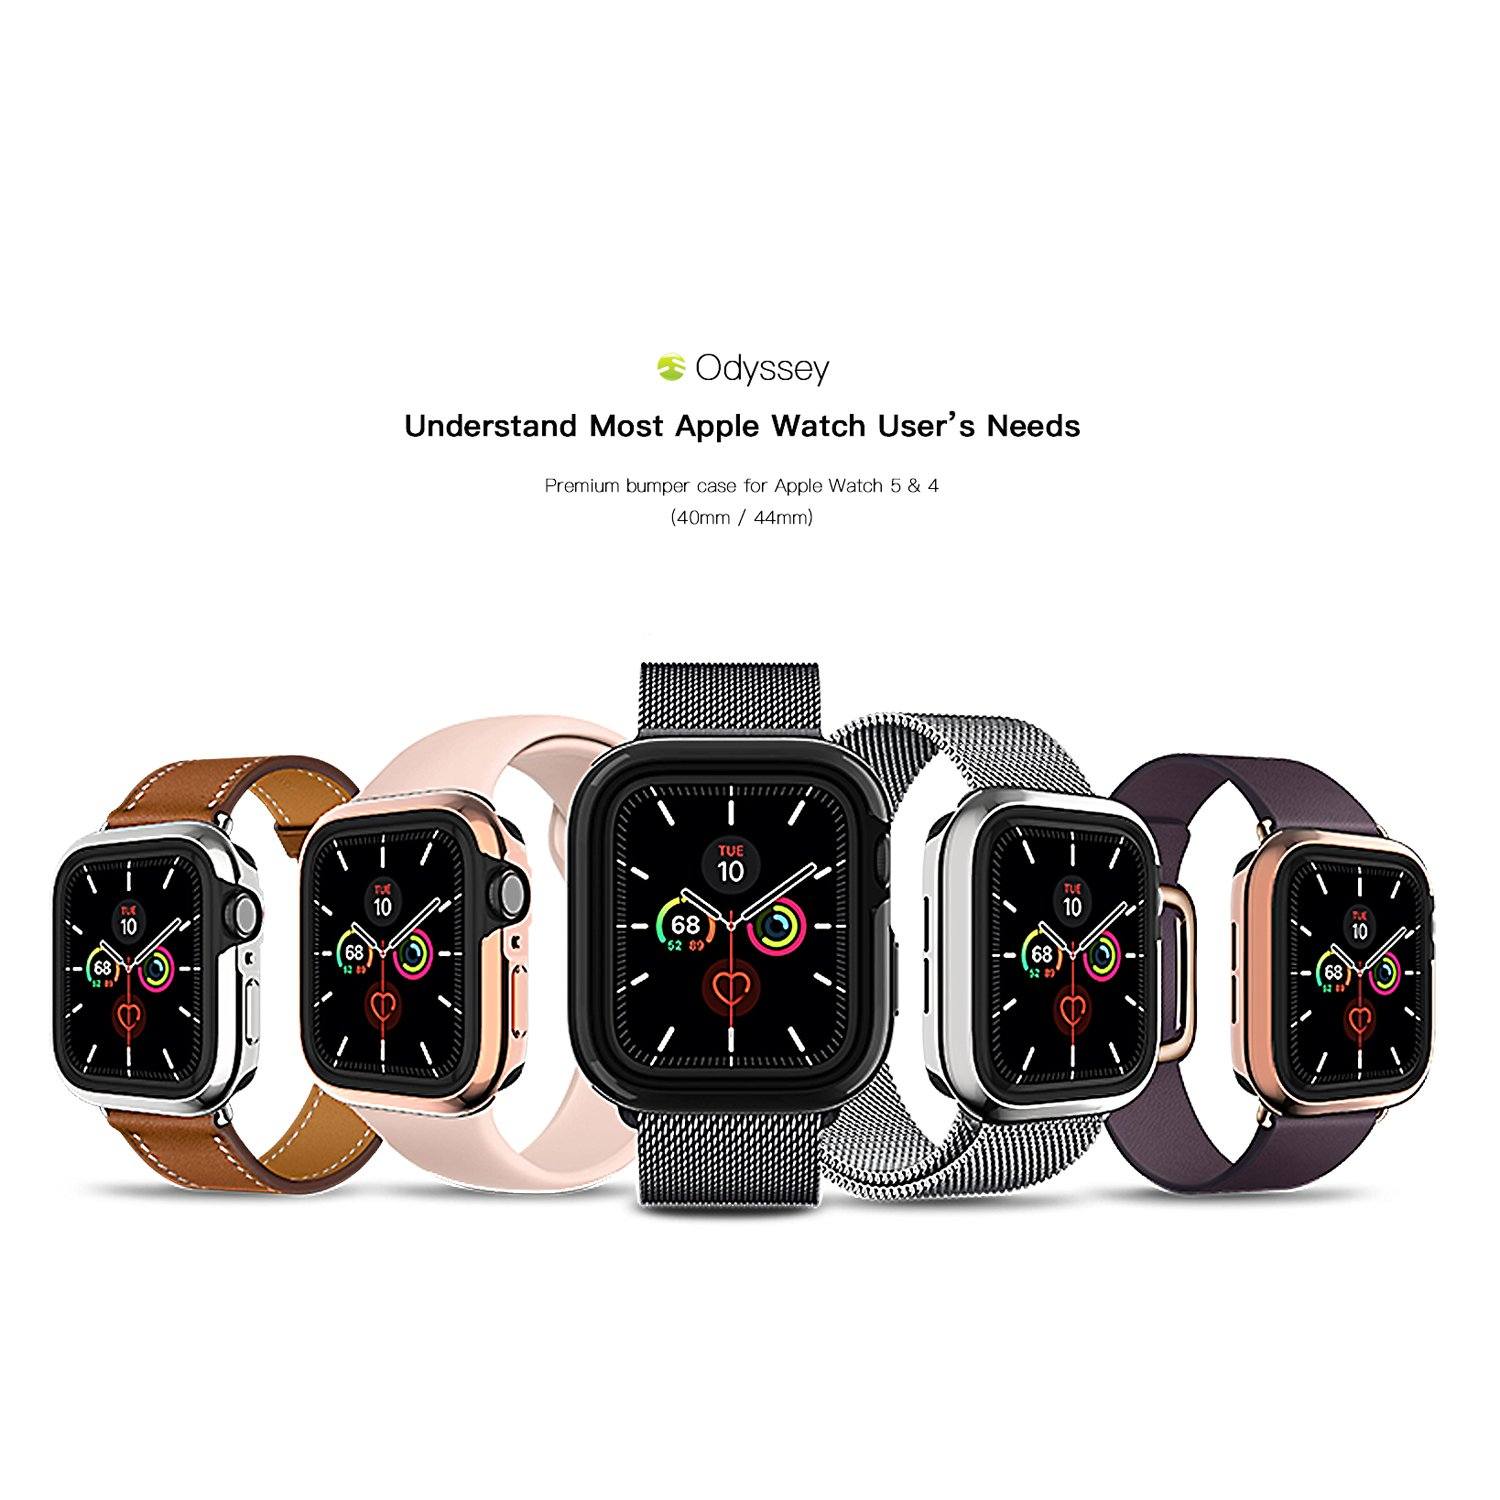 Switcheasy Odyssey Case for Apple Watch Series 4/5/6/SE 40mm, Space Rose Gold Default Switcheasy 